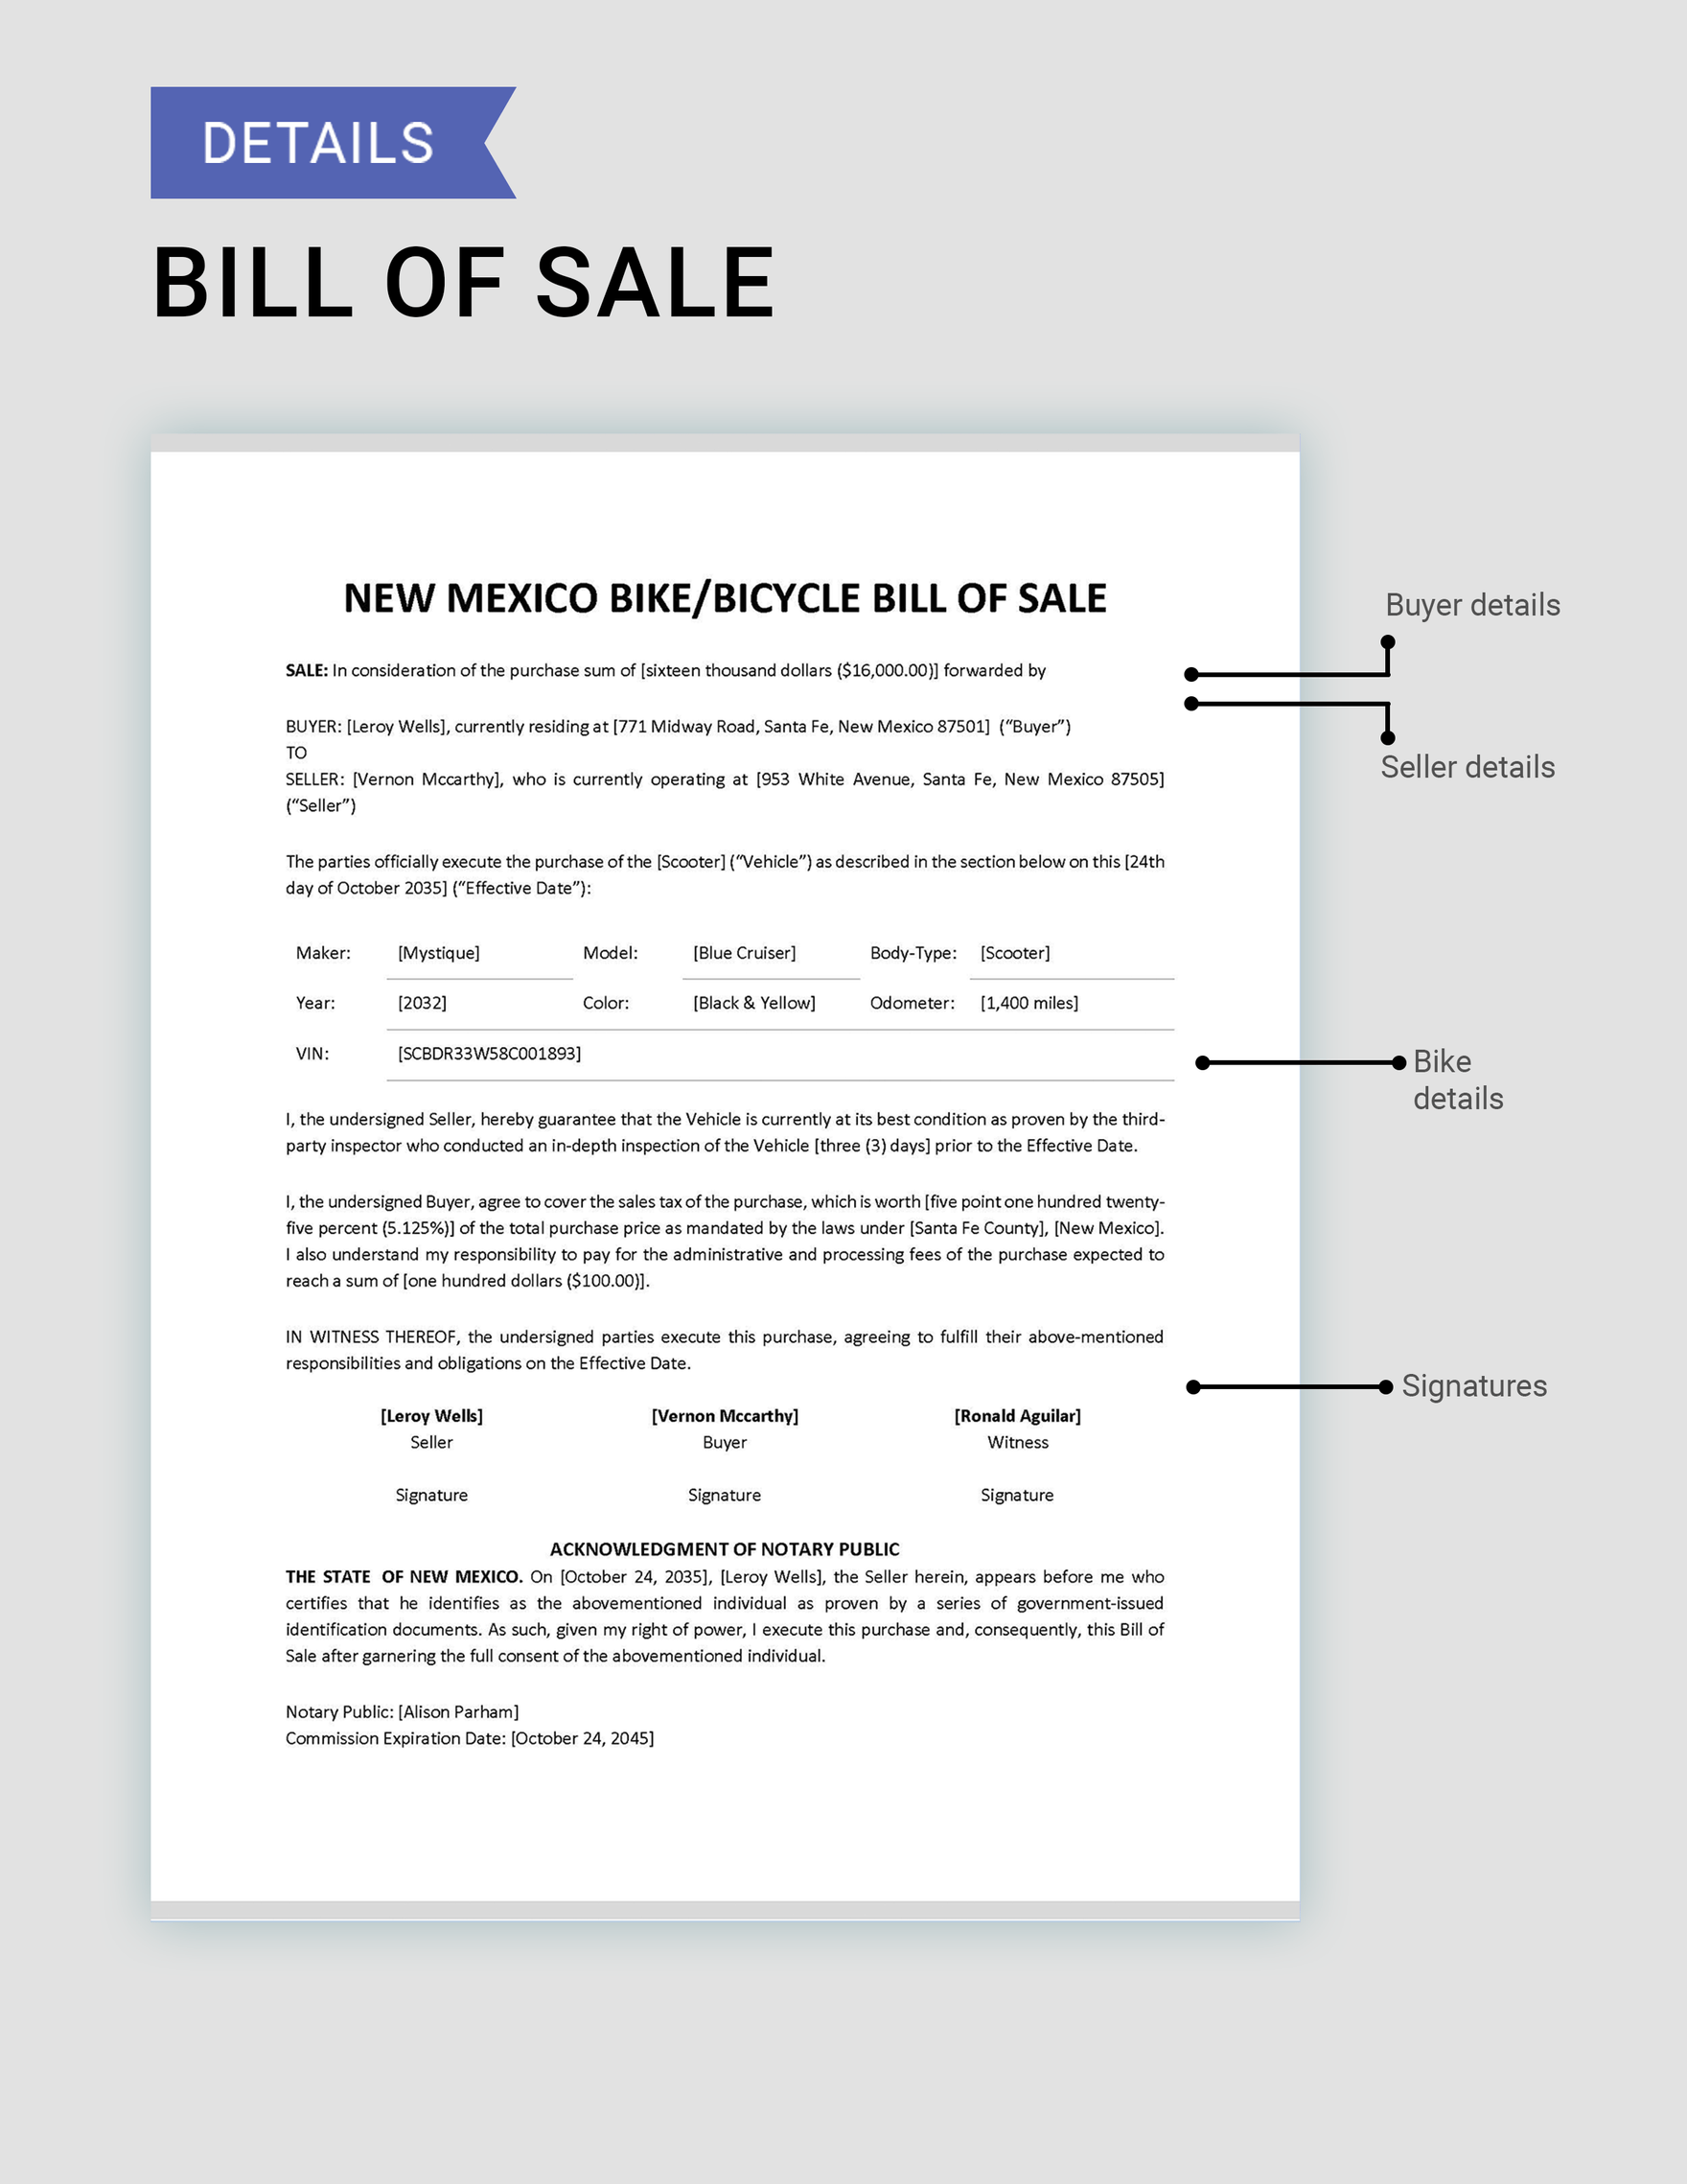 New Mexico Bike/ Bicycle Bill of Sale Template